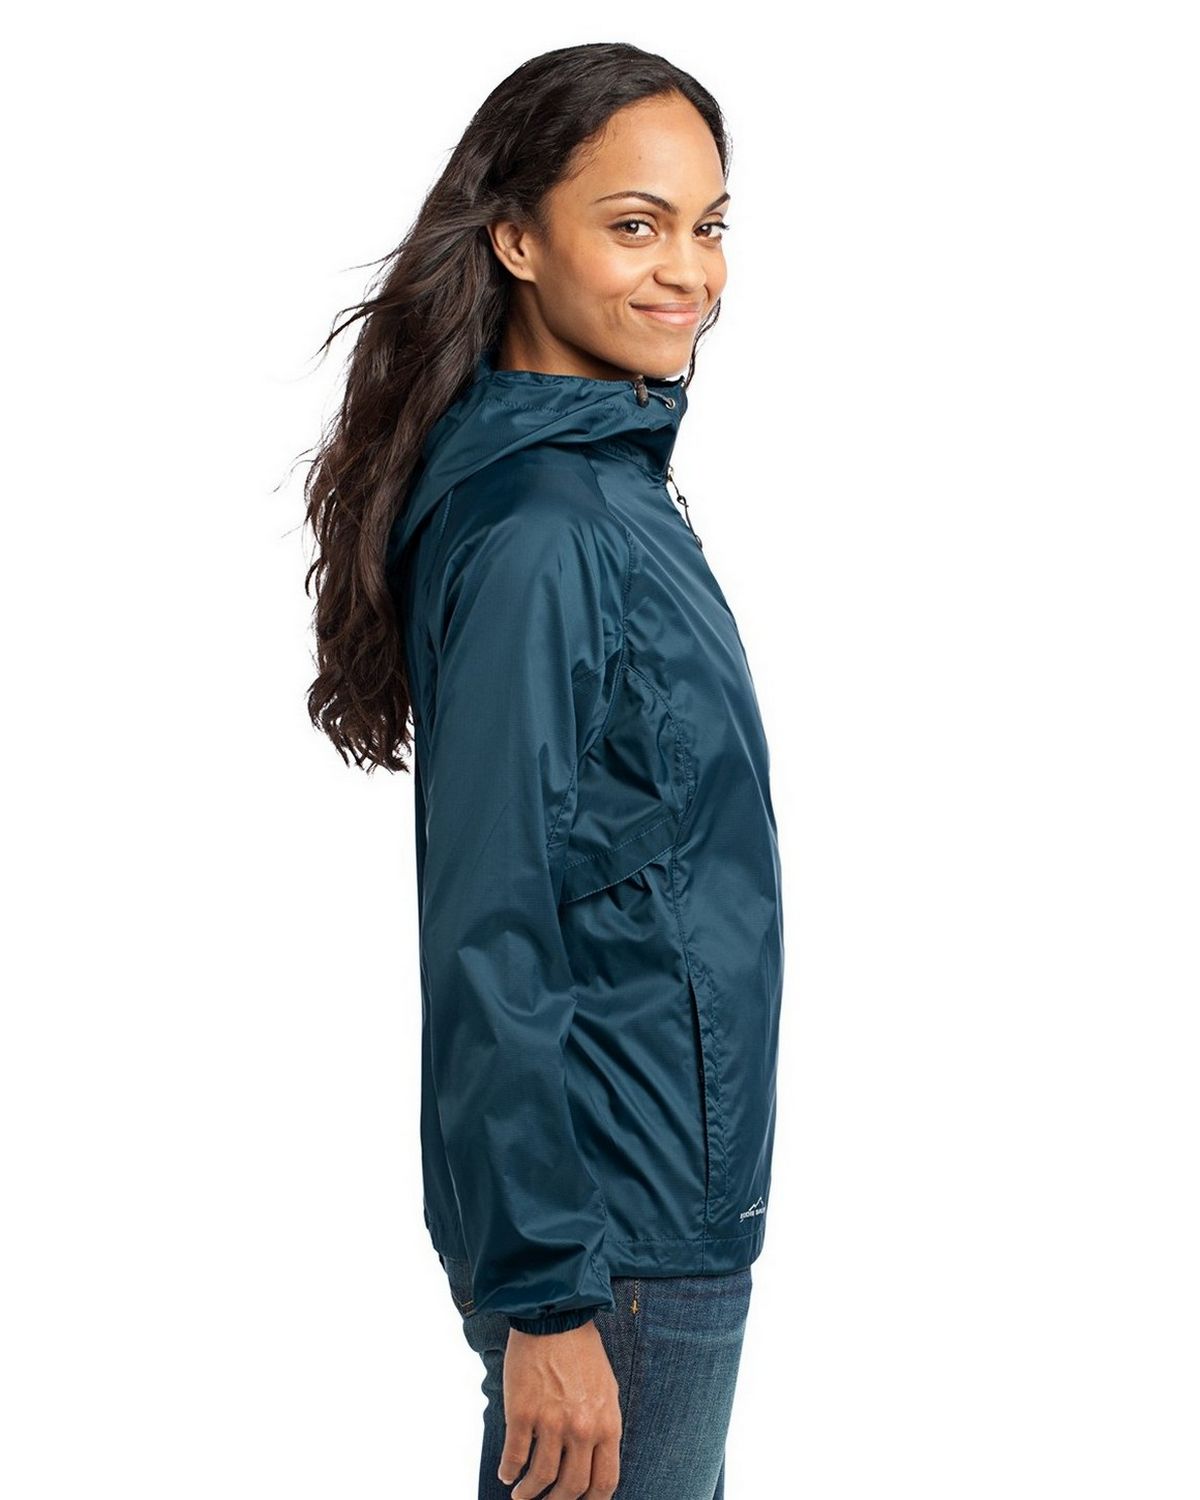 Eddie Bauer Logo Embroidered Packable Wind Jacket at ApparelnBags.com